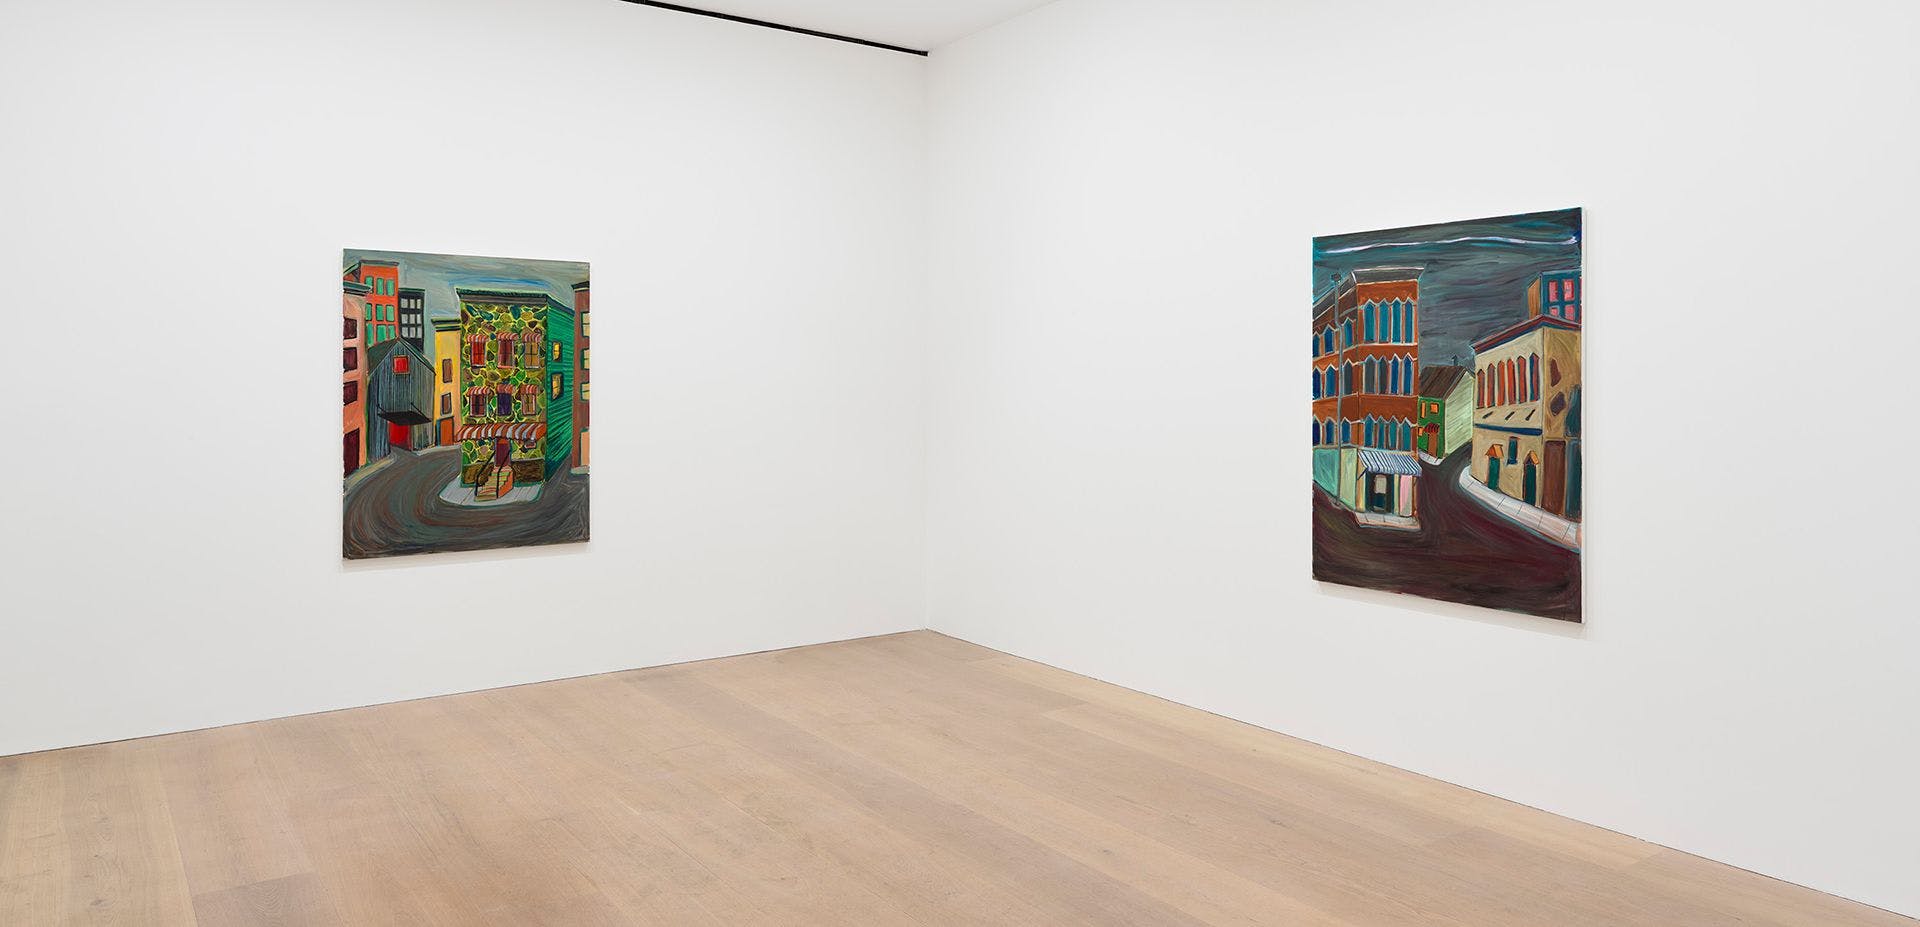 An installation view of the exhibition Josh Smith: Spectre at David Zwirner London, in 2020.